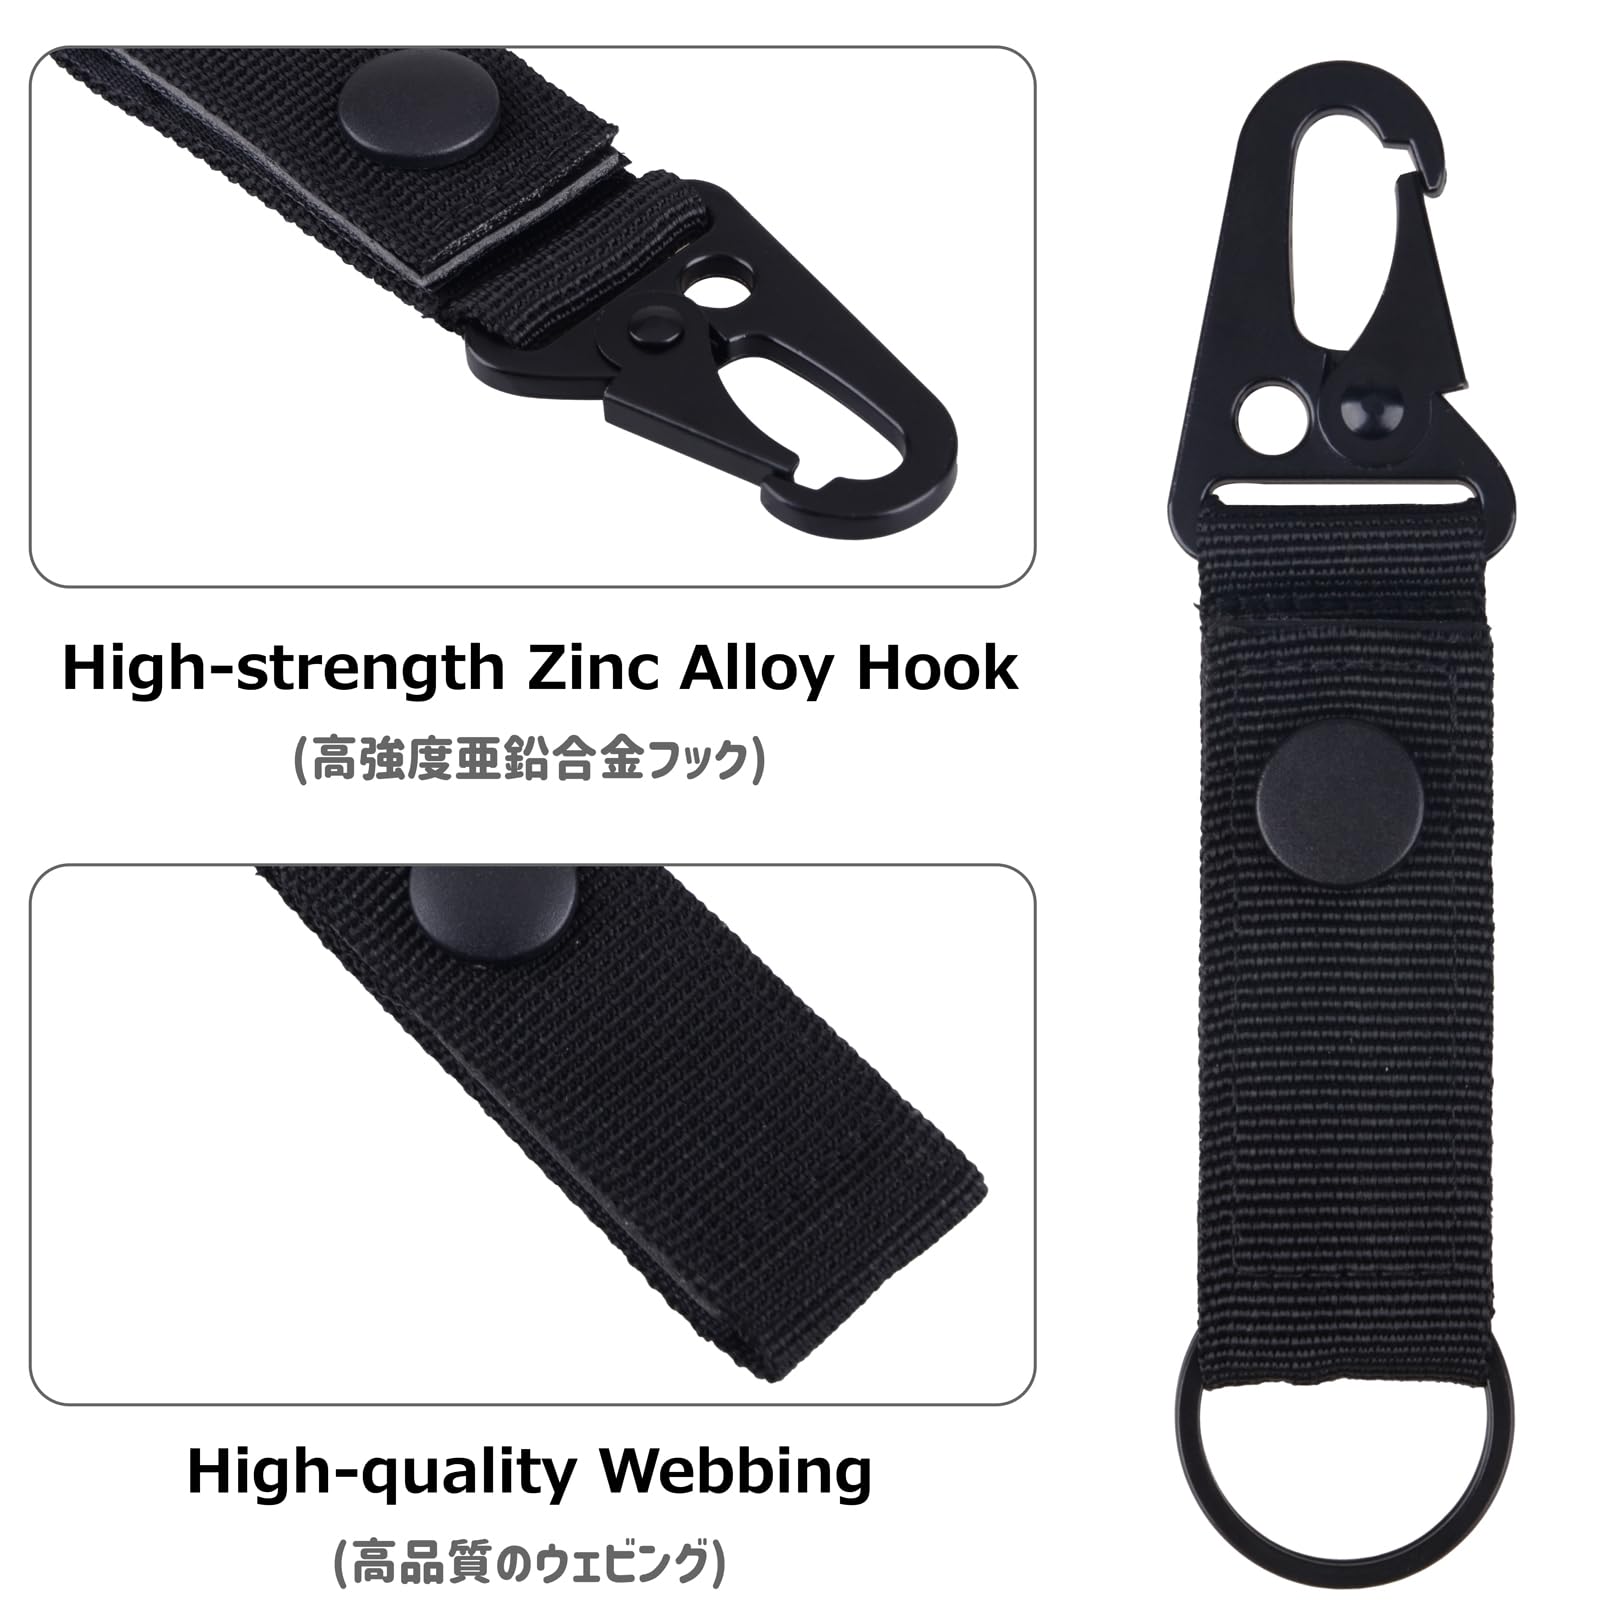 Azarxis Tactical Hanging Belt Webbing Carabiner Buckle Molle Strap Nylon Snap Hook Clip, Keychain Keyholder Ring Tactical Backpack Molle Clip for Climbing Hiking Outdoor (Army Green - Pack of 4)